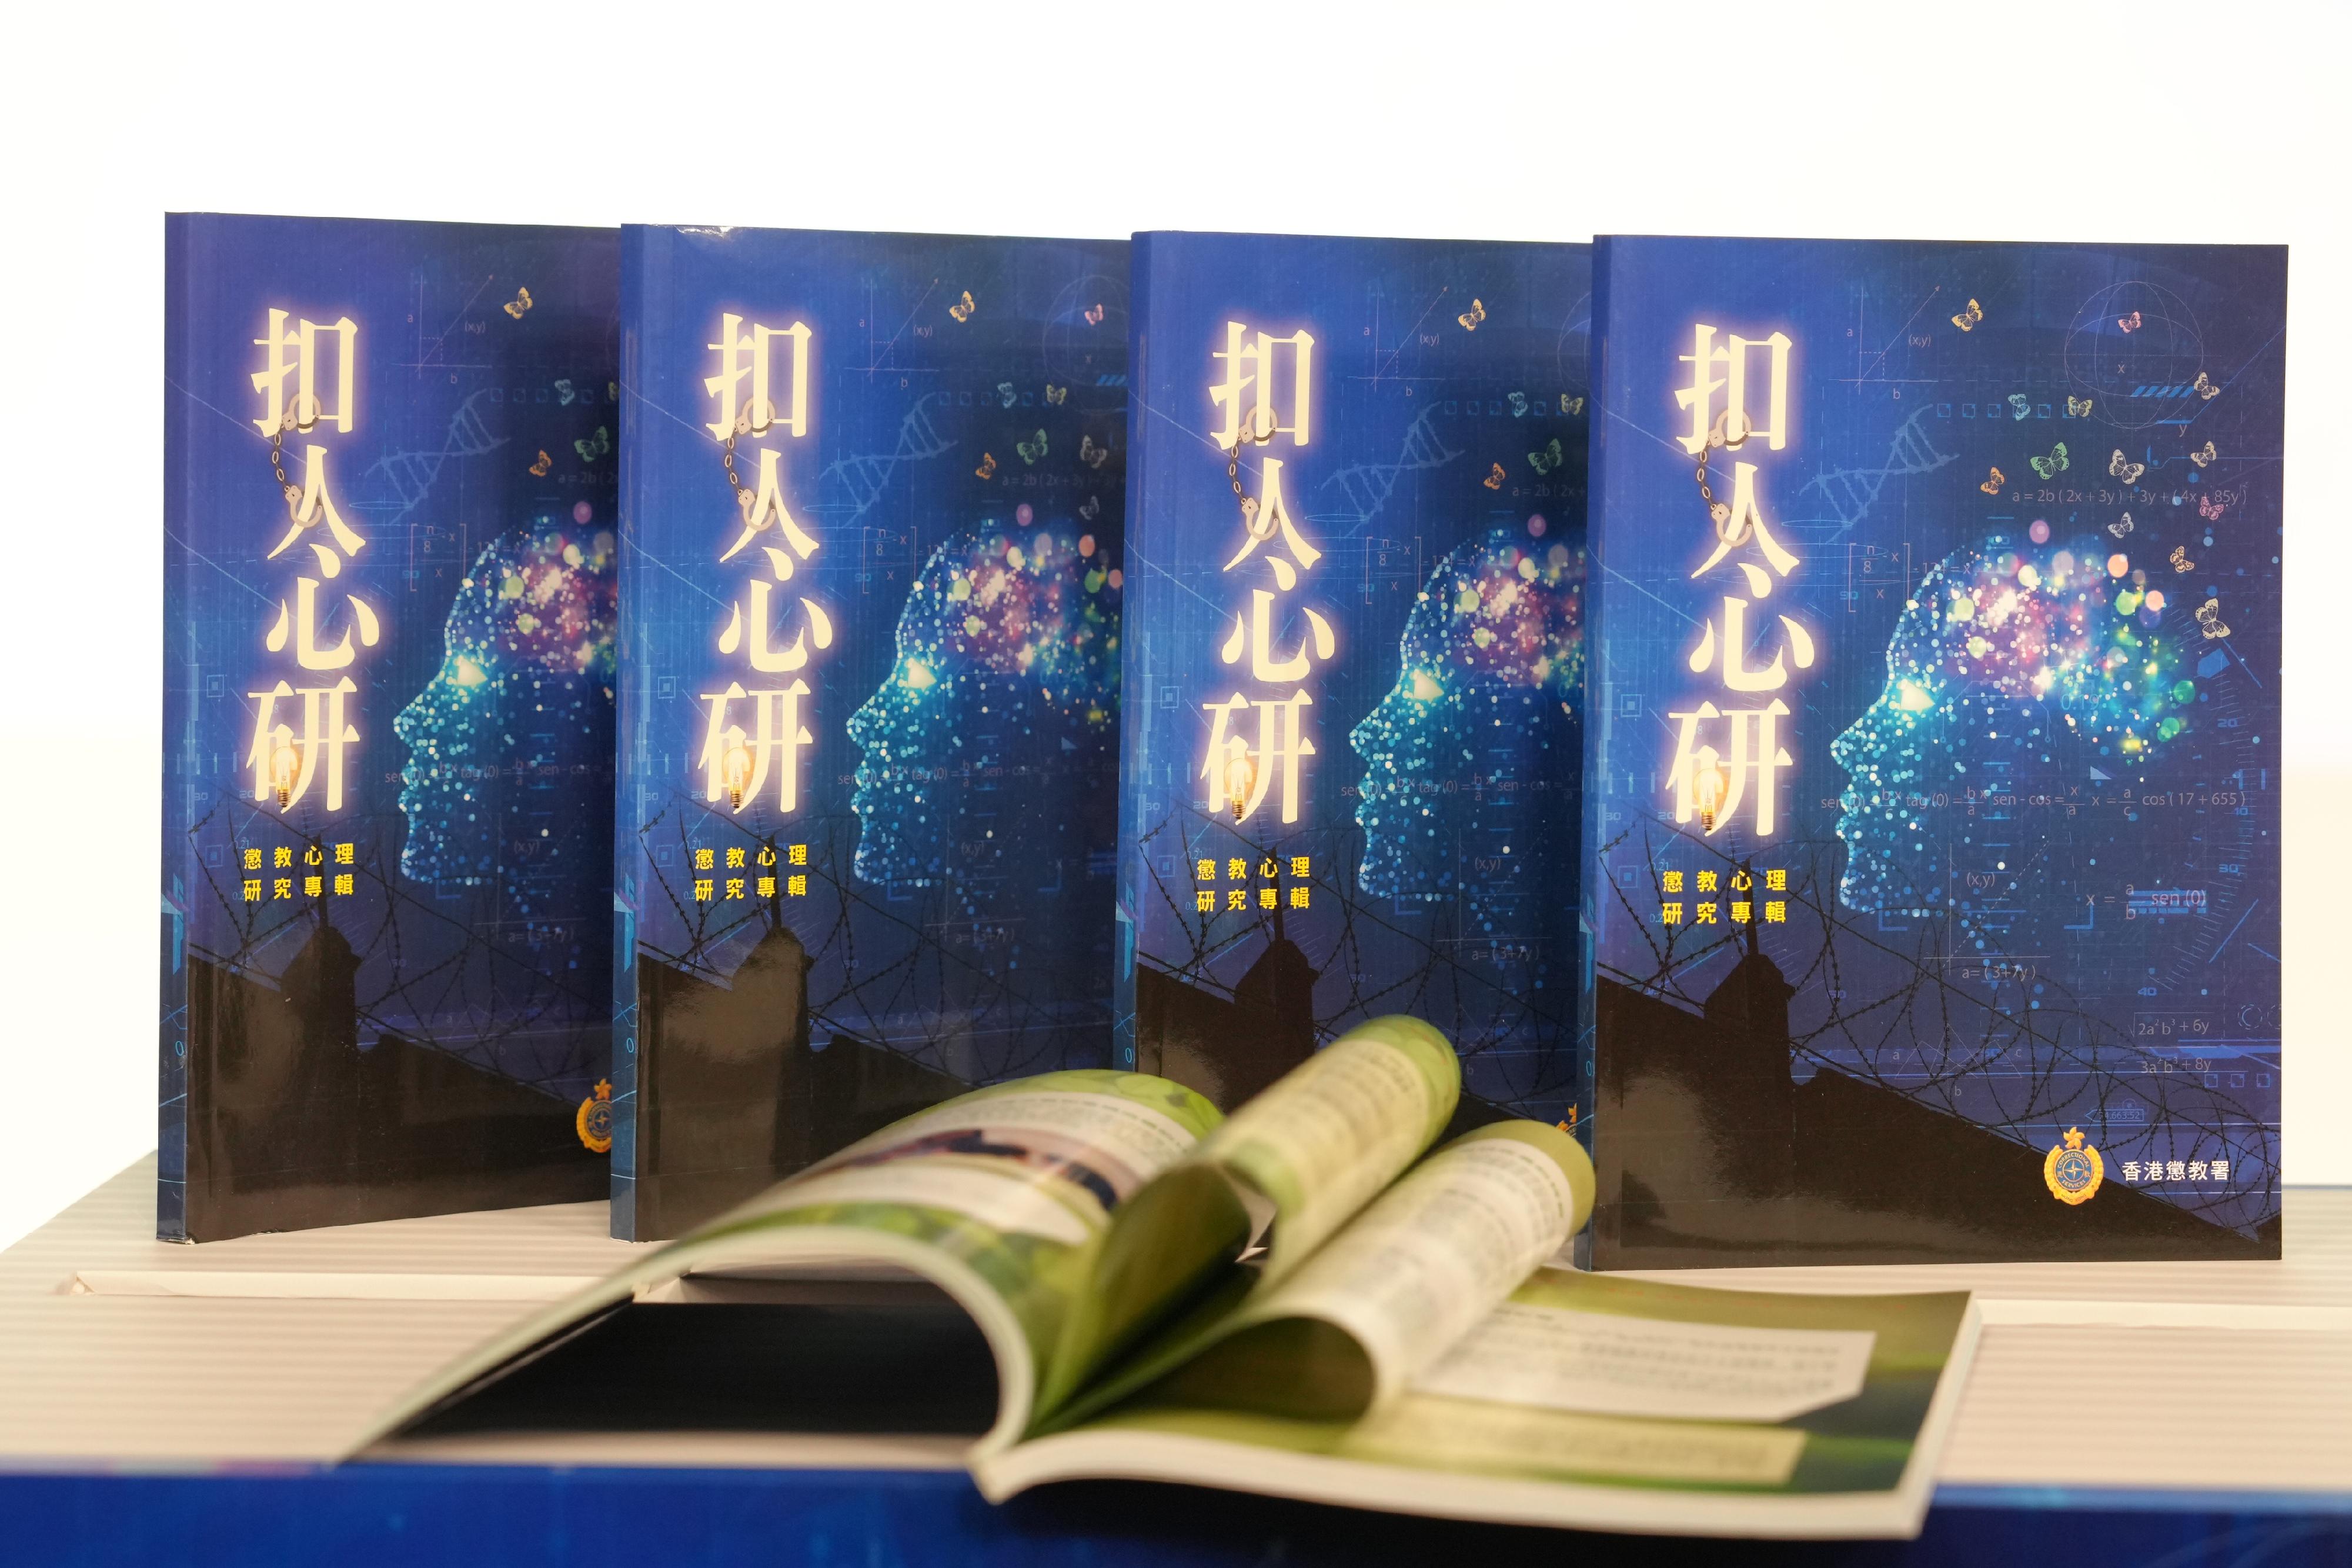 The Correctional Services Department (CSD) launched a new book written by clinical psychologists of the CSD titled "Gripping Insights: Recent psychological research on Hong Kong Corrections" today (May 30).